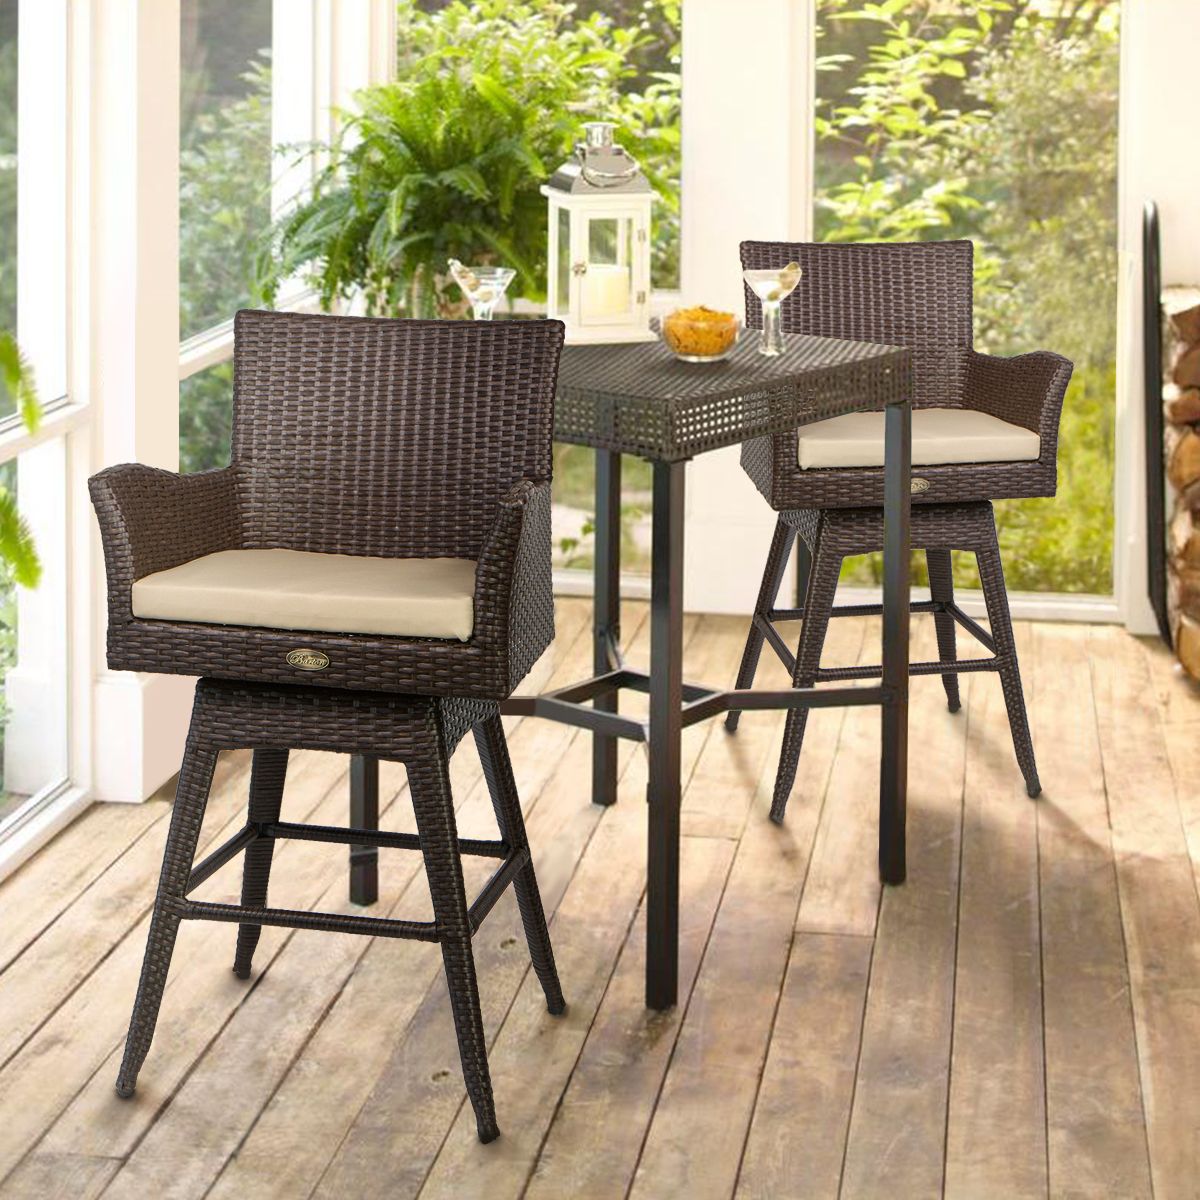 Barton Outdoor Patio Swivel Bar Stool Armrest With Footrest Rattan Pertaining To Well Liked Fabric Outdoor Patio Sets (View 14 of 15)